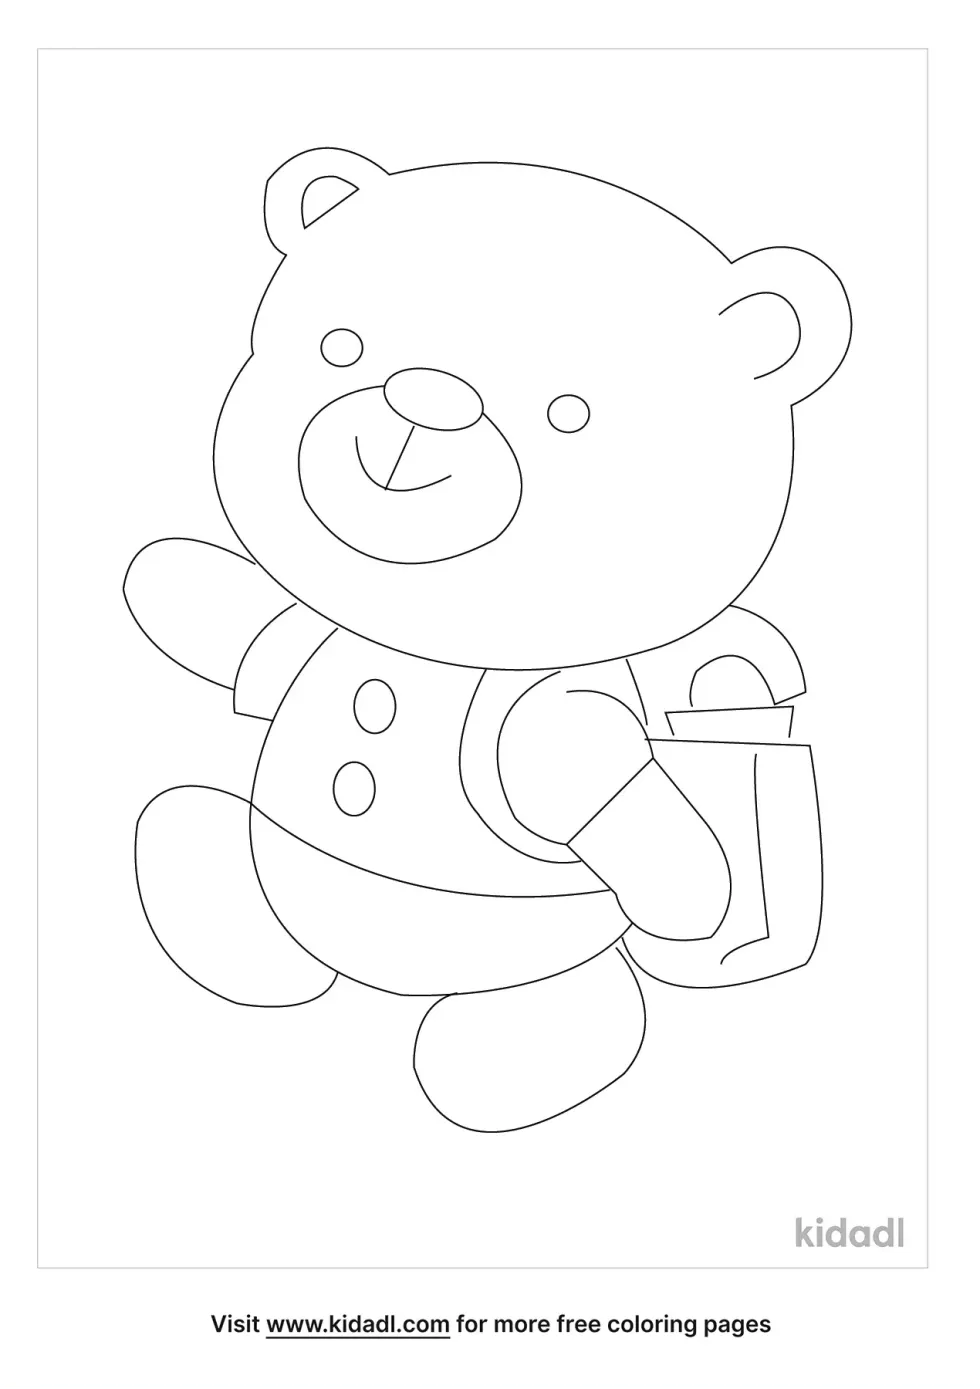 Teddy Bear Going To School Coloring Page